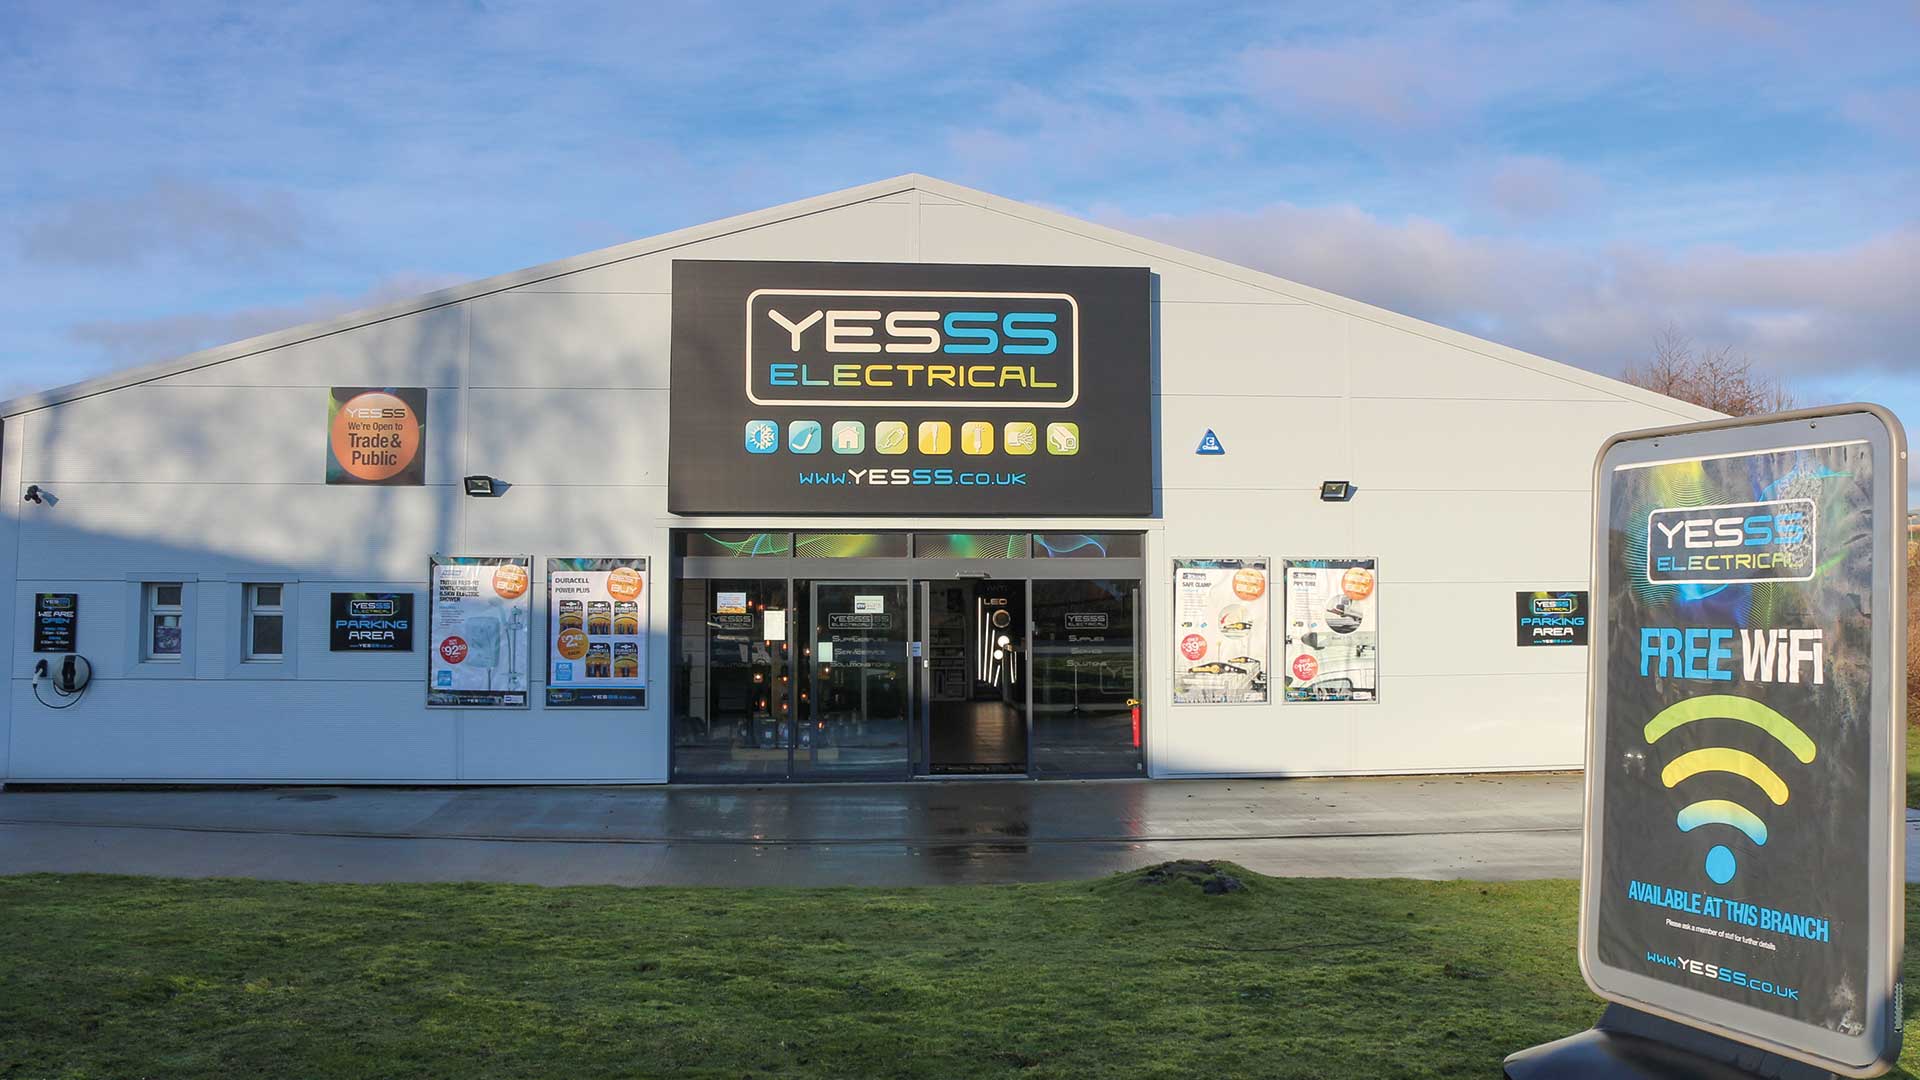 YESSS Electrical appoints digital agency